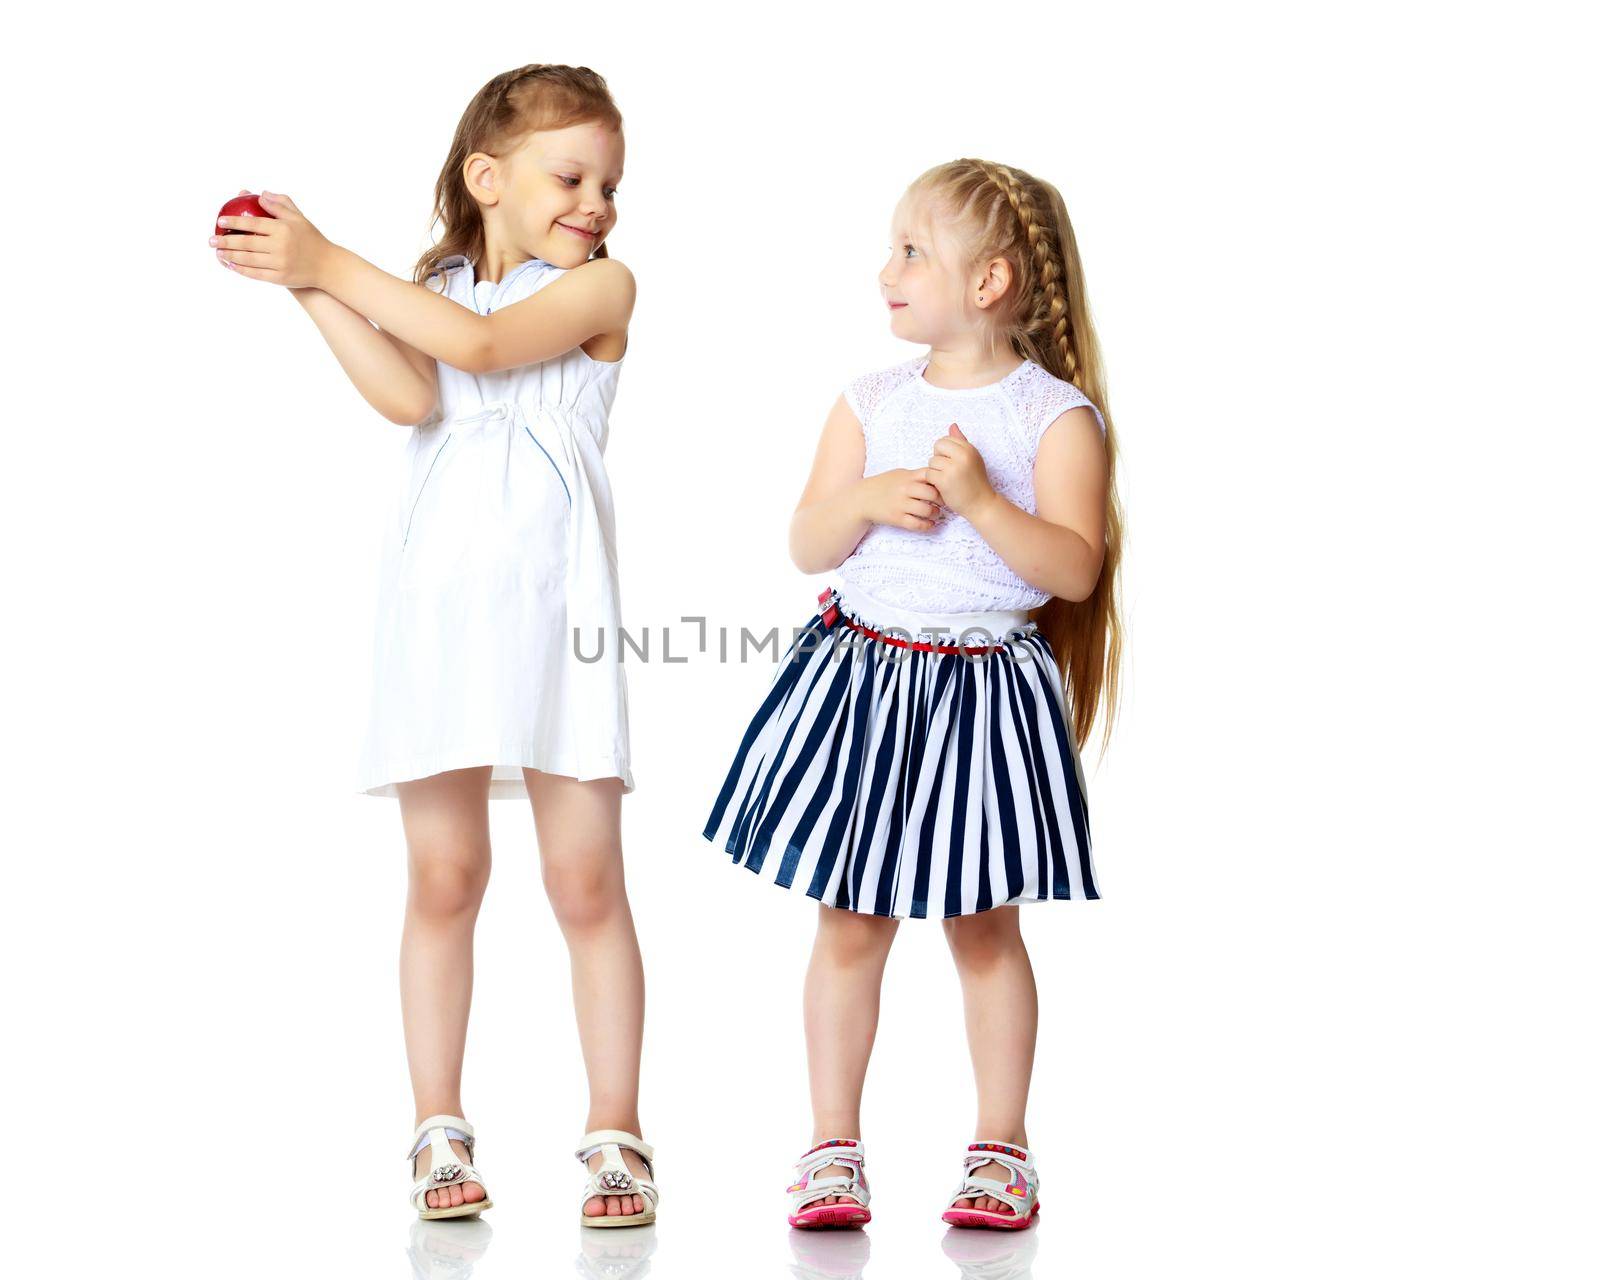 Two cute little girls with apples, in the studio on a white background. Concept of happy childhood, healthy eating. Isolated.